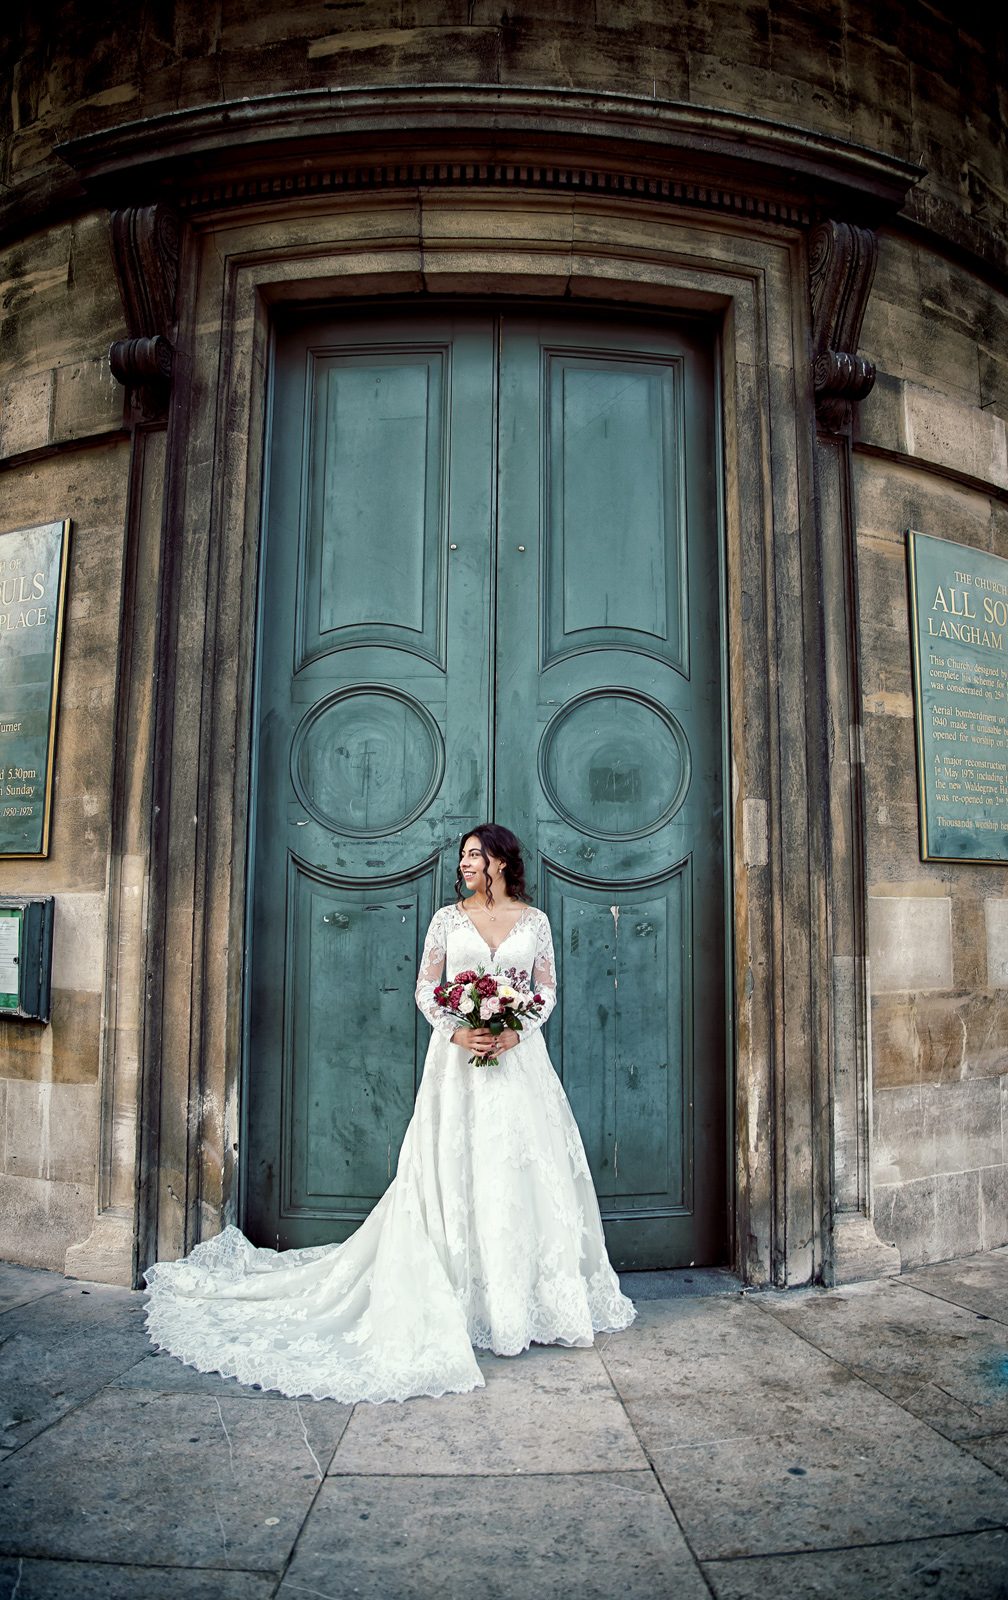 Bride outside All Souls London for her wedding day